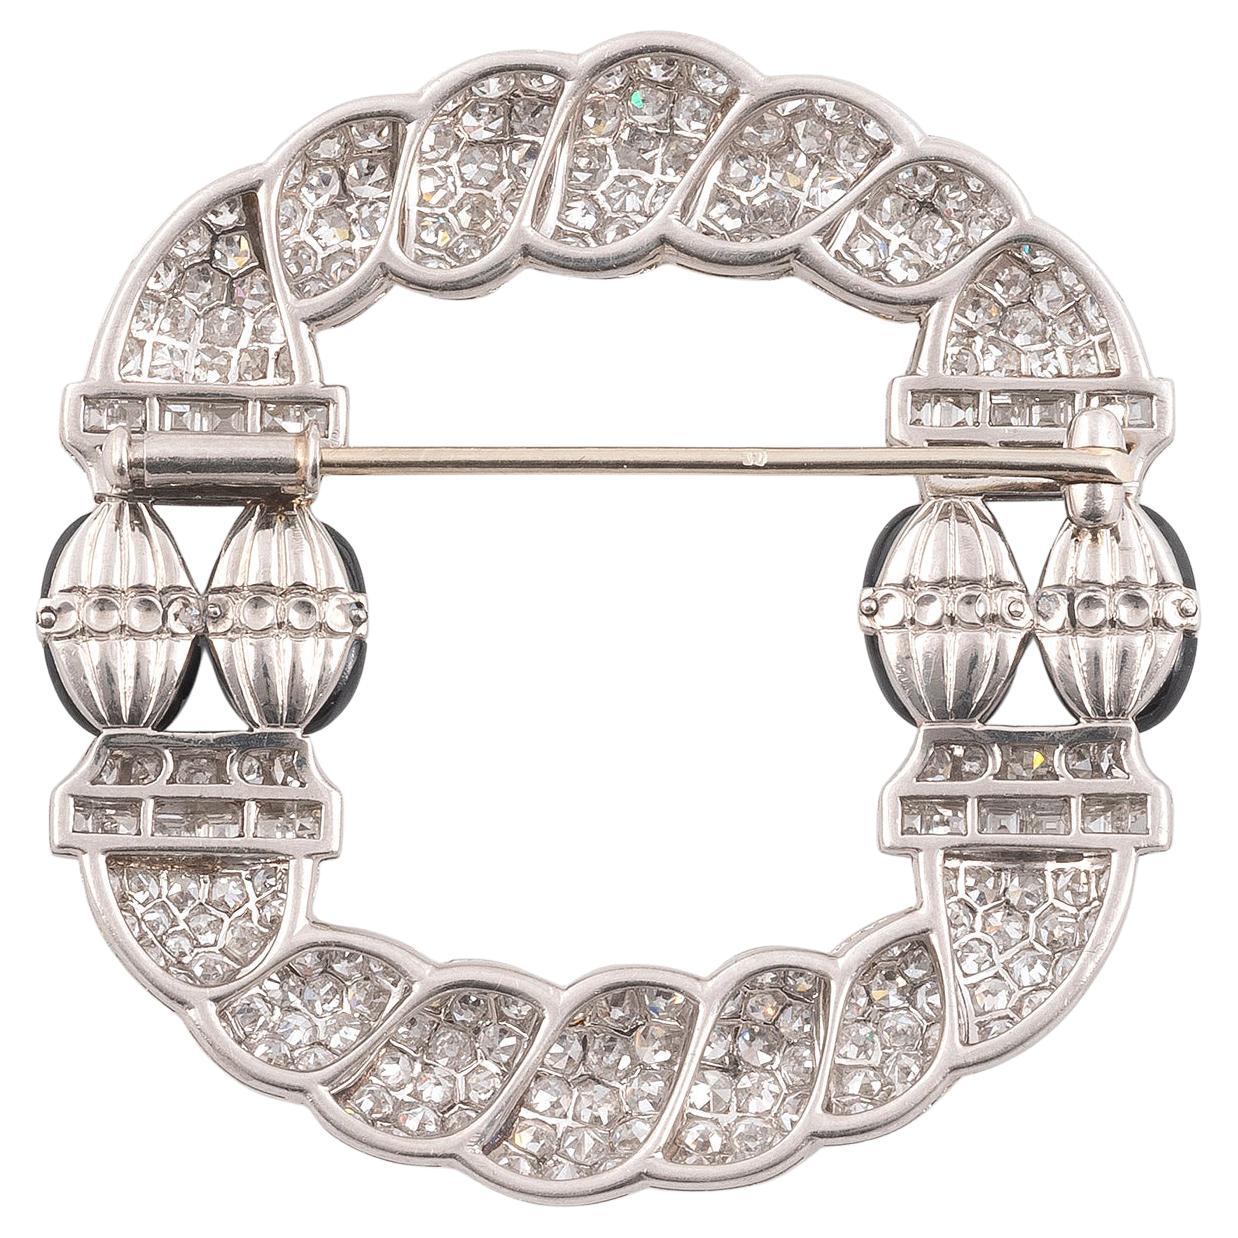 The large-cable pattern is paved with old brilliant-cut diamonds and rows of square diamonds. In the center four sapphire olives with gadroons and surrounded by small rose-cut diamonds. Platinum setting (18K white gold pin). Gross weight: 19.32 gr.